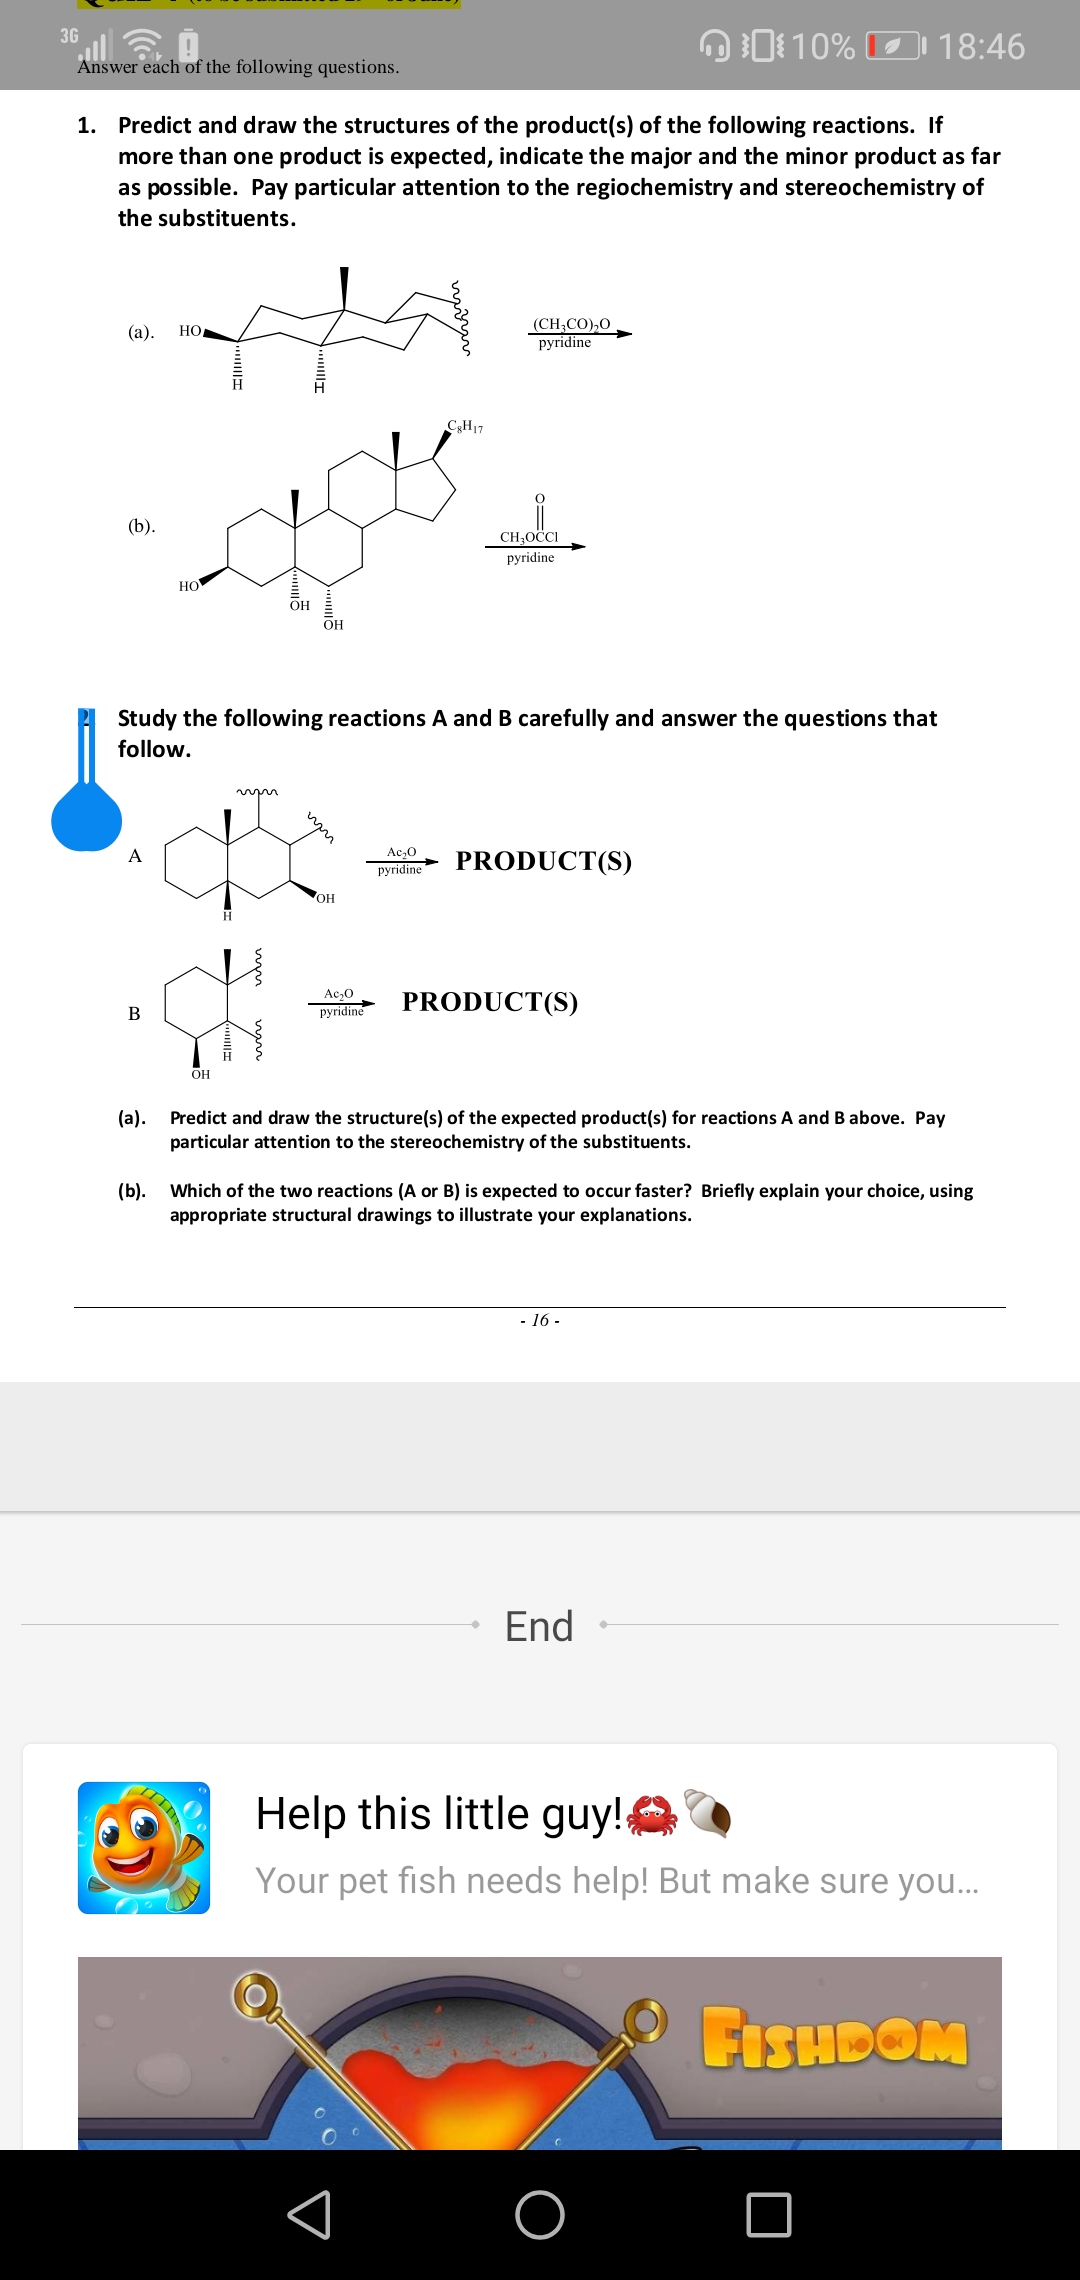 1. Predict and draw the structures of the product(s) of the following reactions. If
more than one product is expected, indicate the major and the minor product as far
as possible. Pay particular attention to the regiochemistry and stereochemistry of
the substituents.
(CH;CO),0
pyridine
(а).
НО
CH17
(b).
CH;OČCI
pyridine
HO
OH
OH
